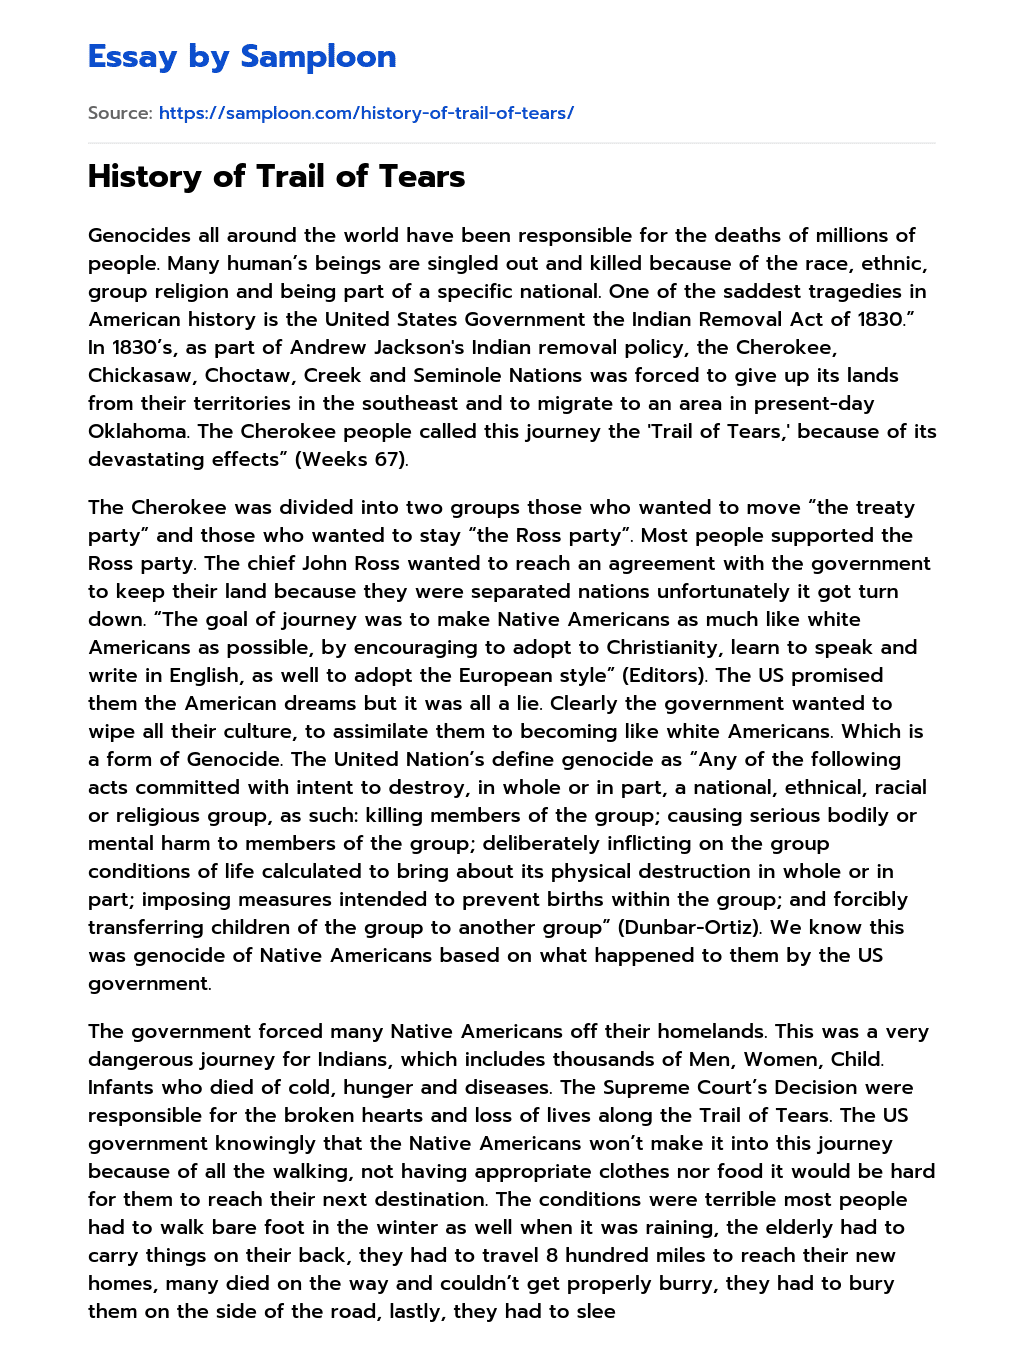 trail of tears analytical essay